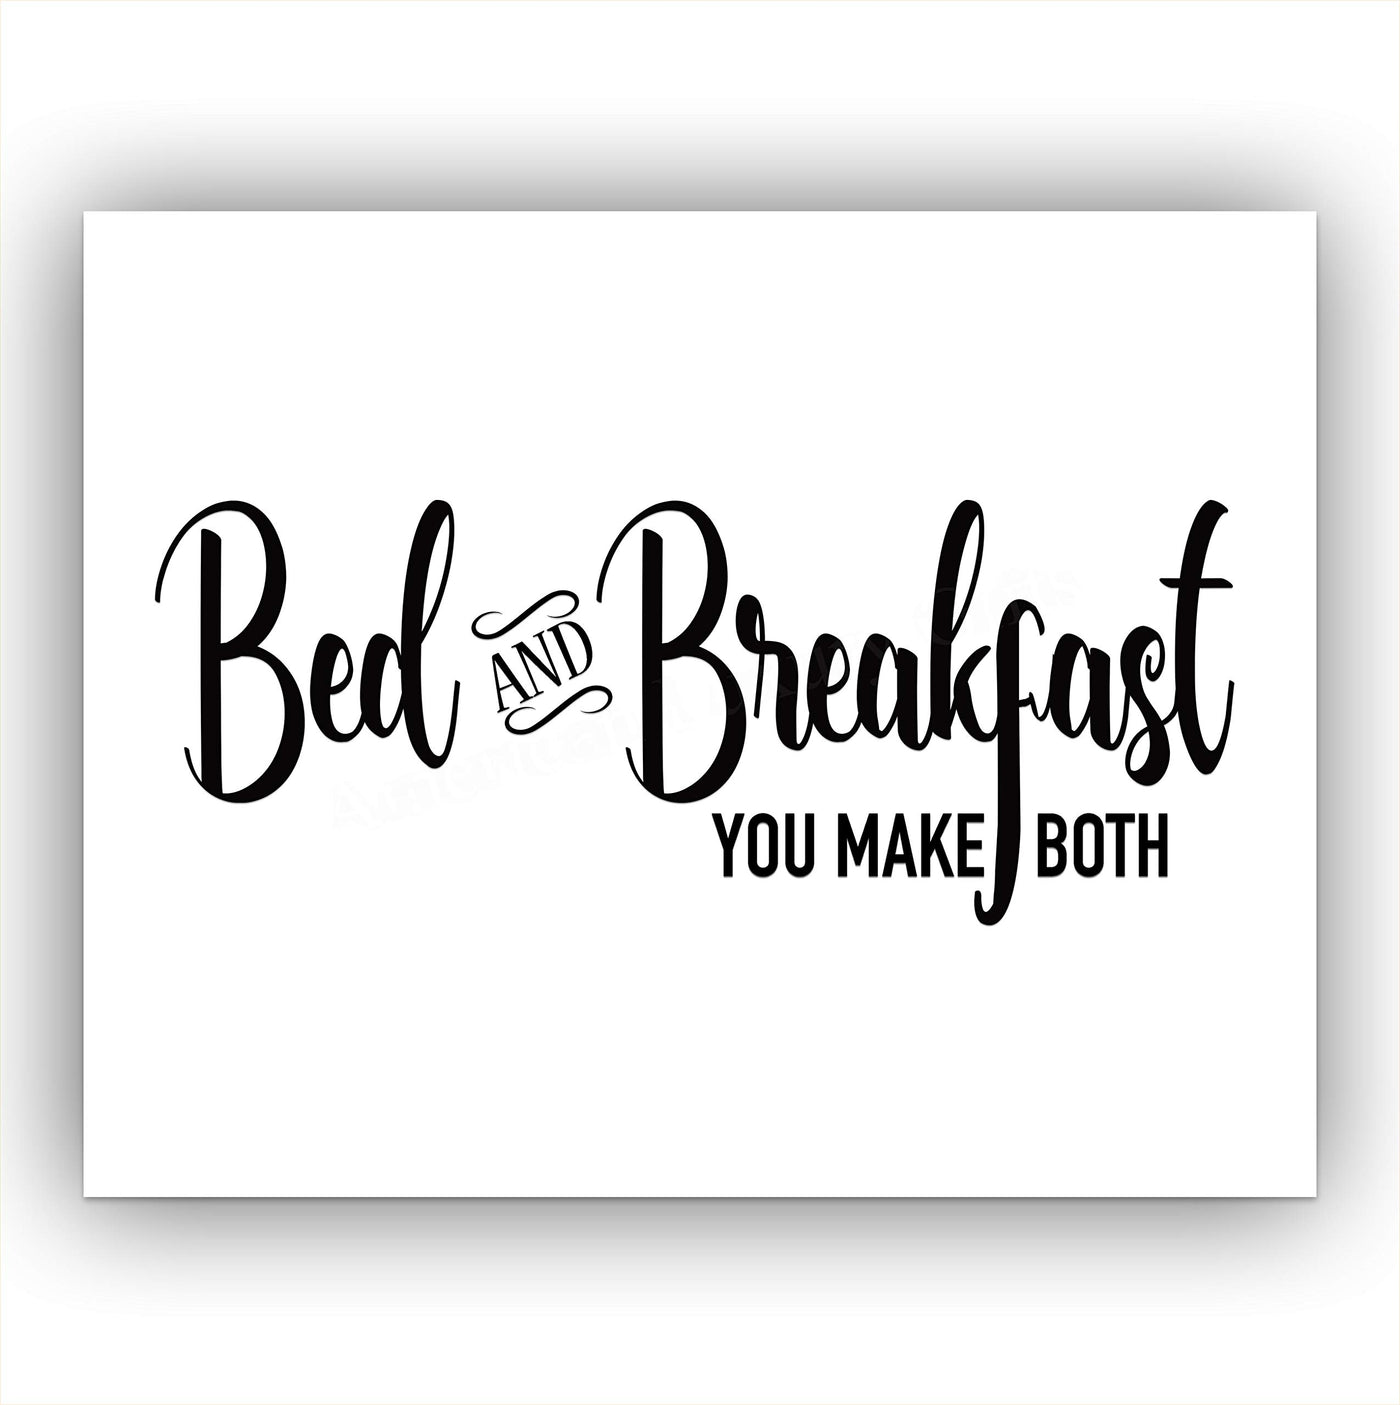 Bed & Breakfast-You Make Both- Funny Welcome Sign- 14 x 11" Modern Typographic Wall Art Print-Ready to Frame. Ideal Decor for Any Guest House-Cabin-Lake House. Perfect Humorous Sign for B&B!